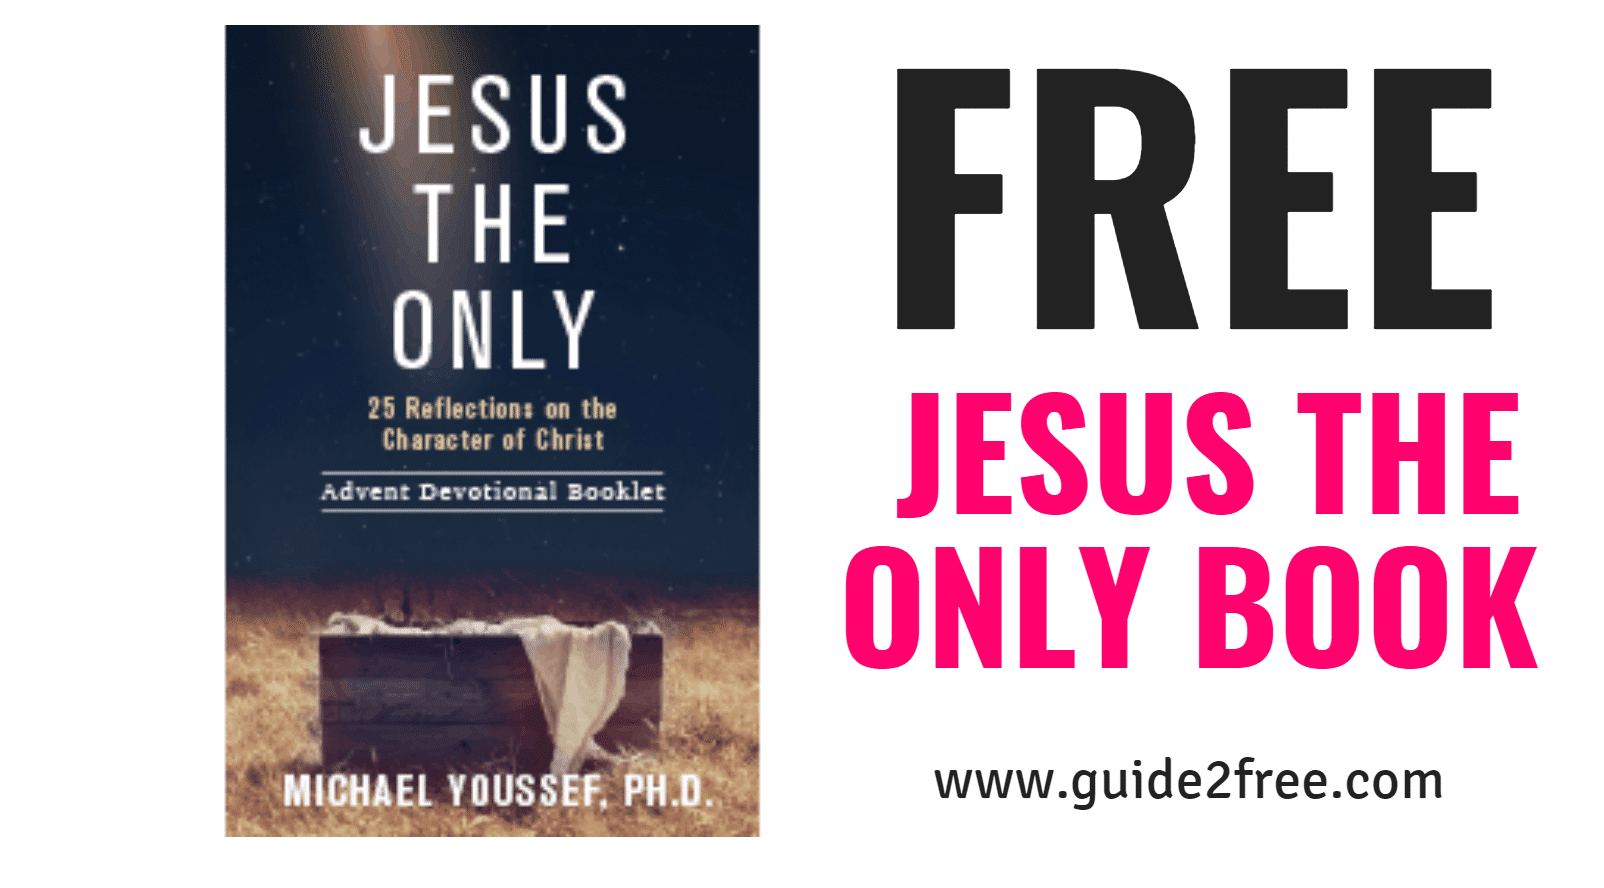 FREE Jesus The Only Book